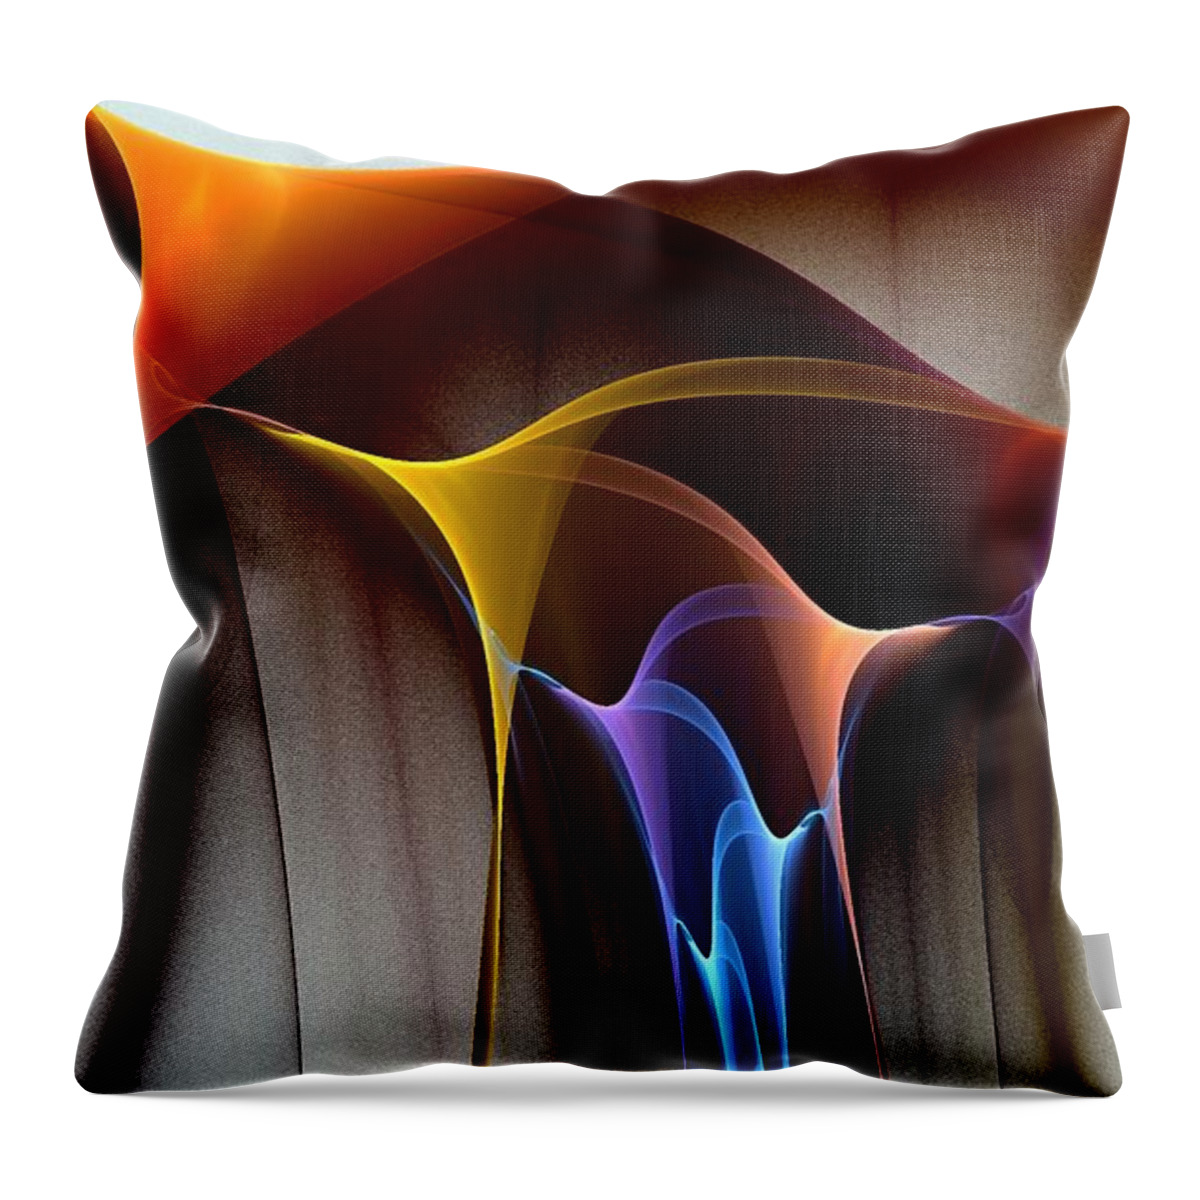 Home Throw Pillow featuring the digital art 3D Shapes 01 by Greg Moores